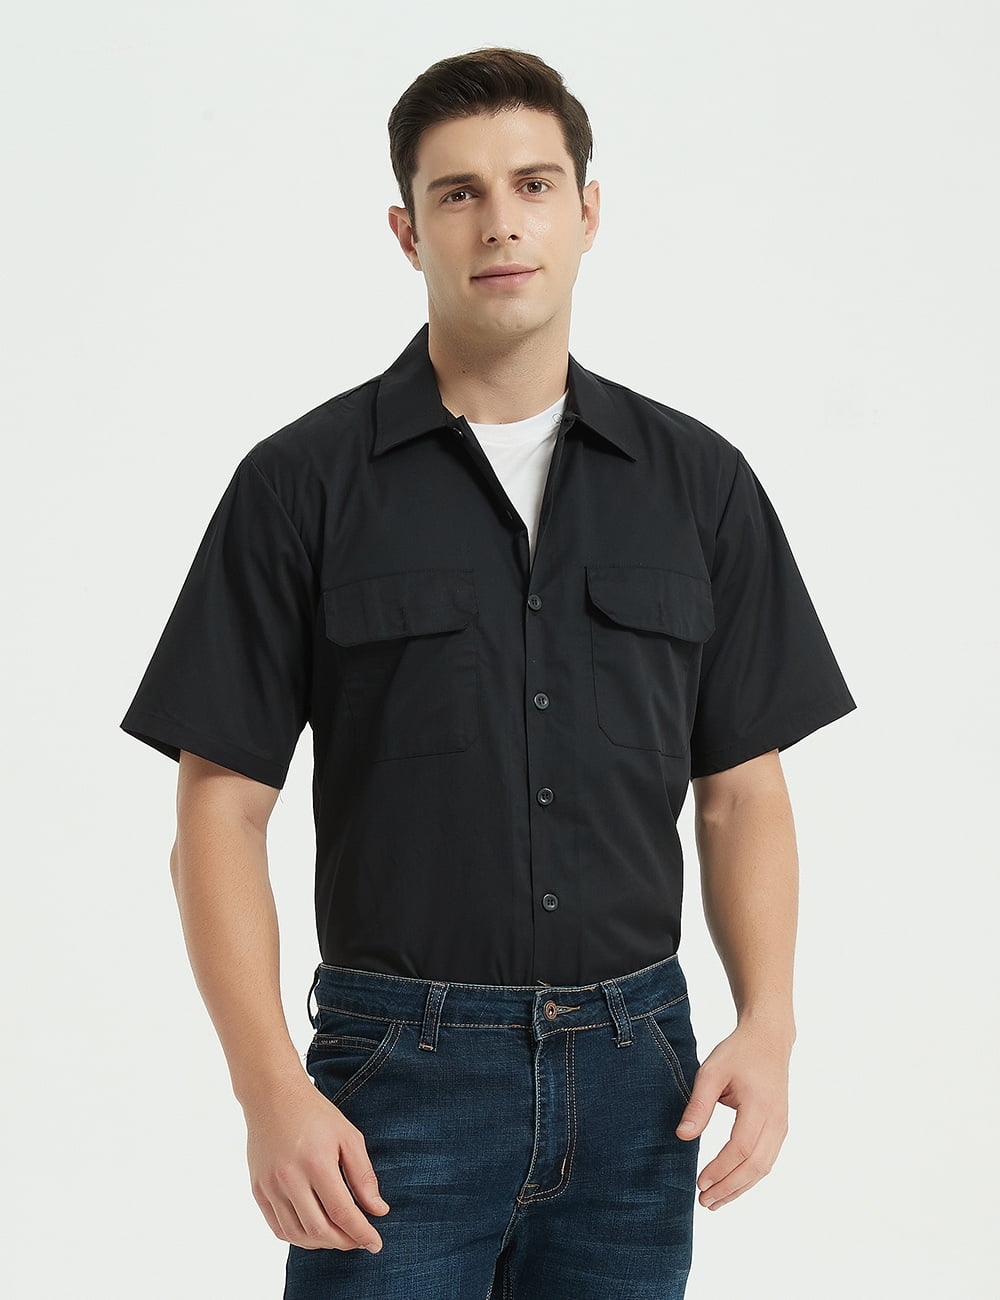  TopTie Personalized Short Sleeve Work Shirt Customized Work  Clothes - Embroidered Above Two Pockets-Black-S : Clothing, Shoes & Jewelry